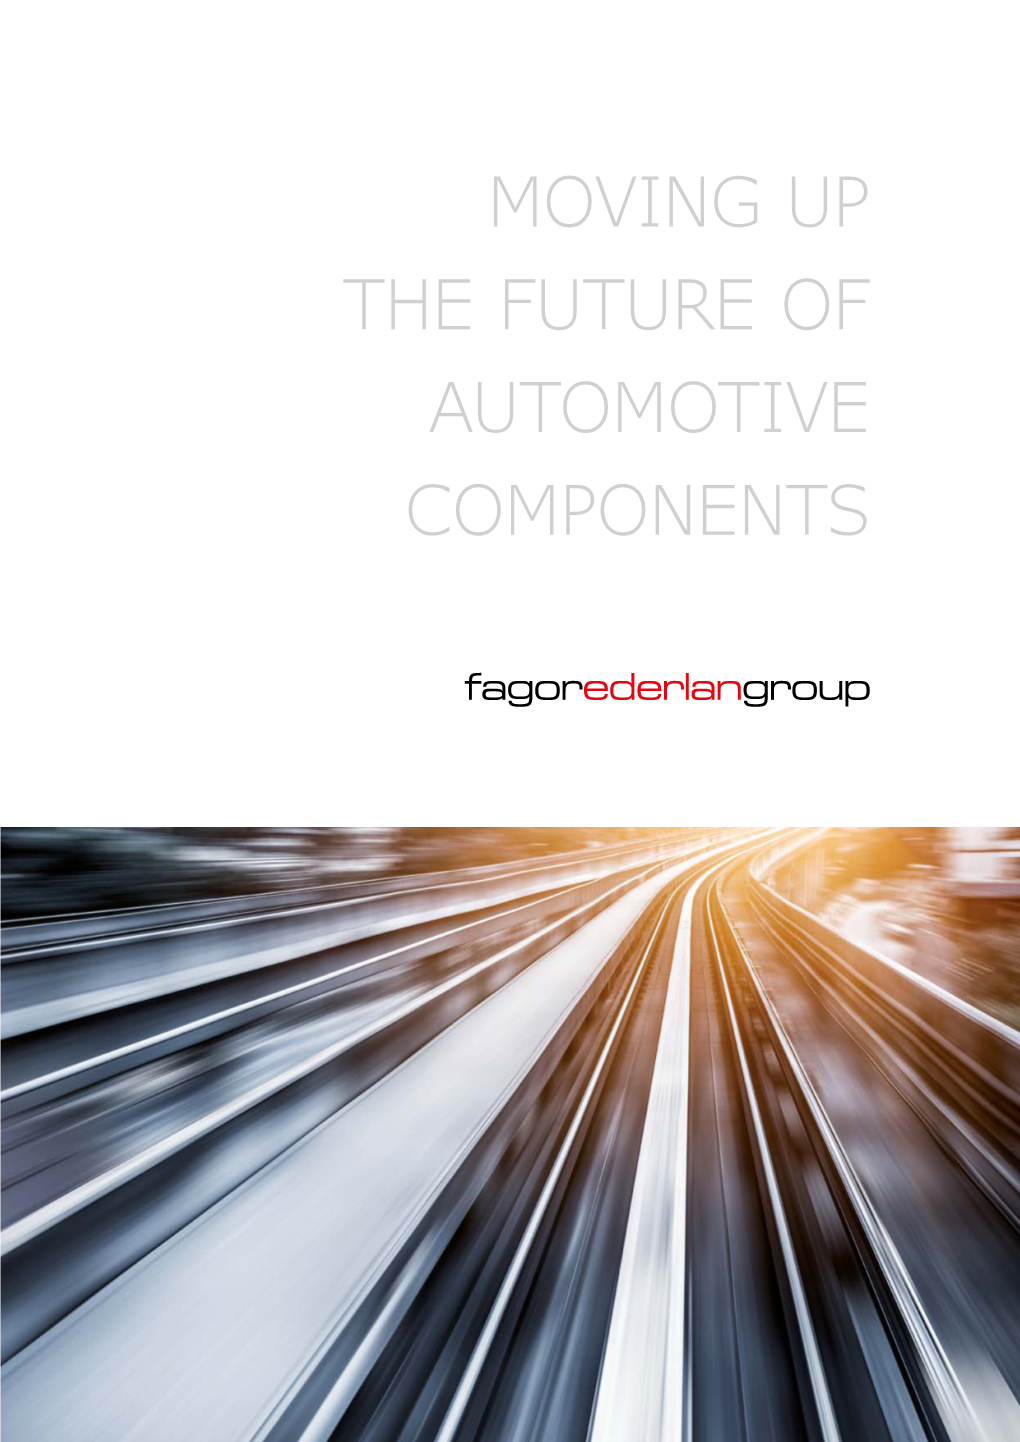 Moving up the Future of Automotive Components